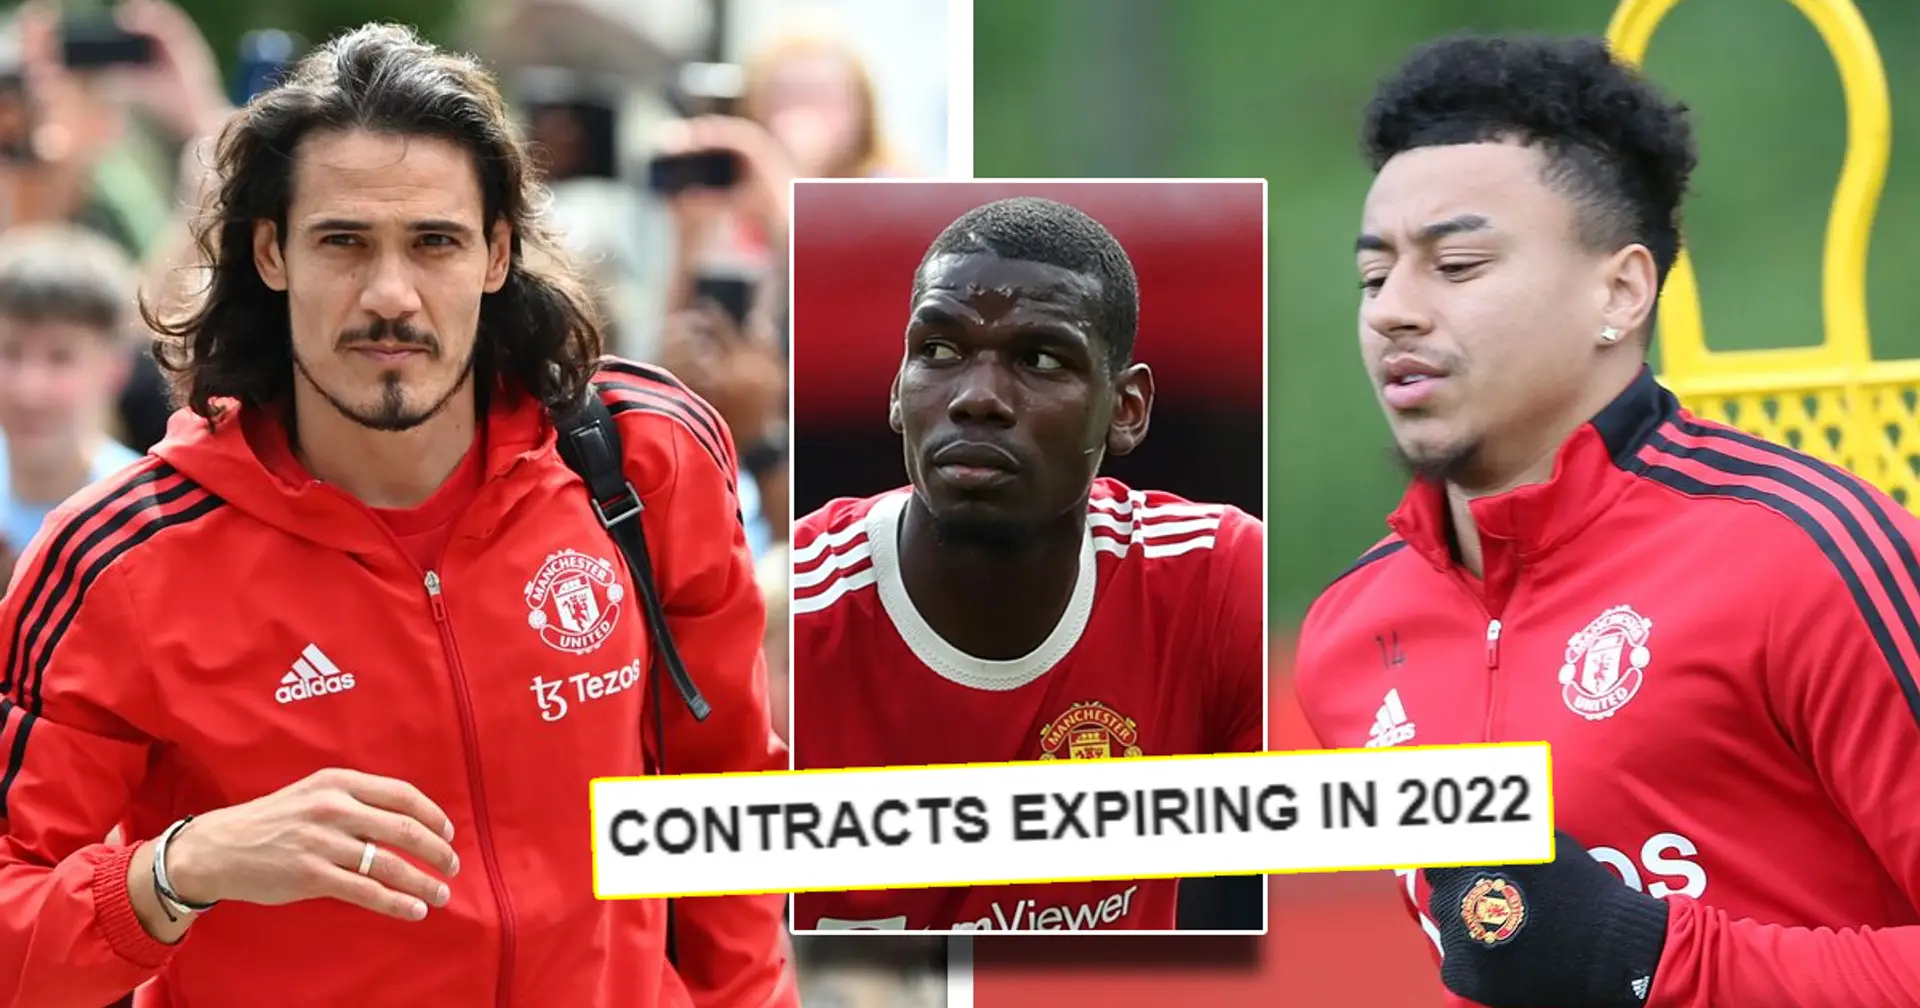 6 Man United players who could leave as free agents this summer: Contract round-up